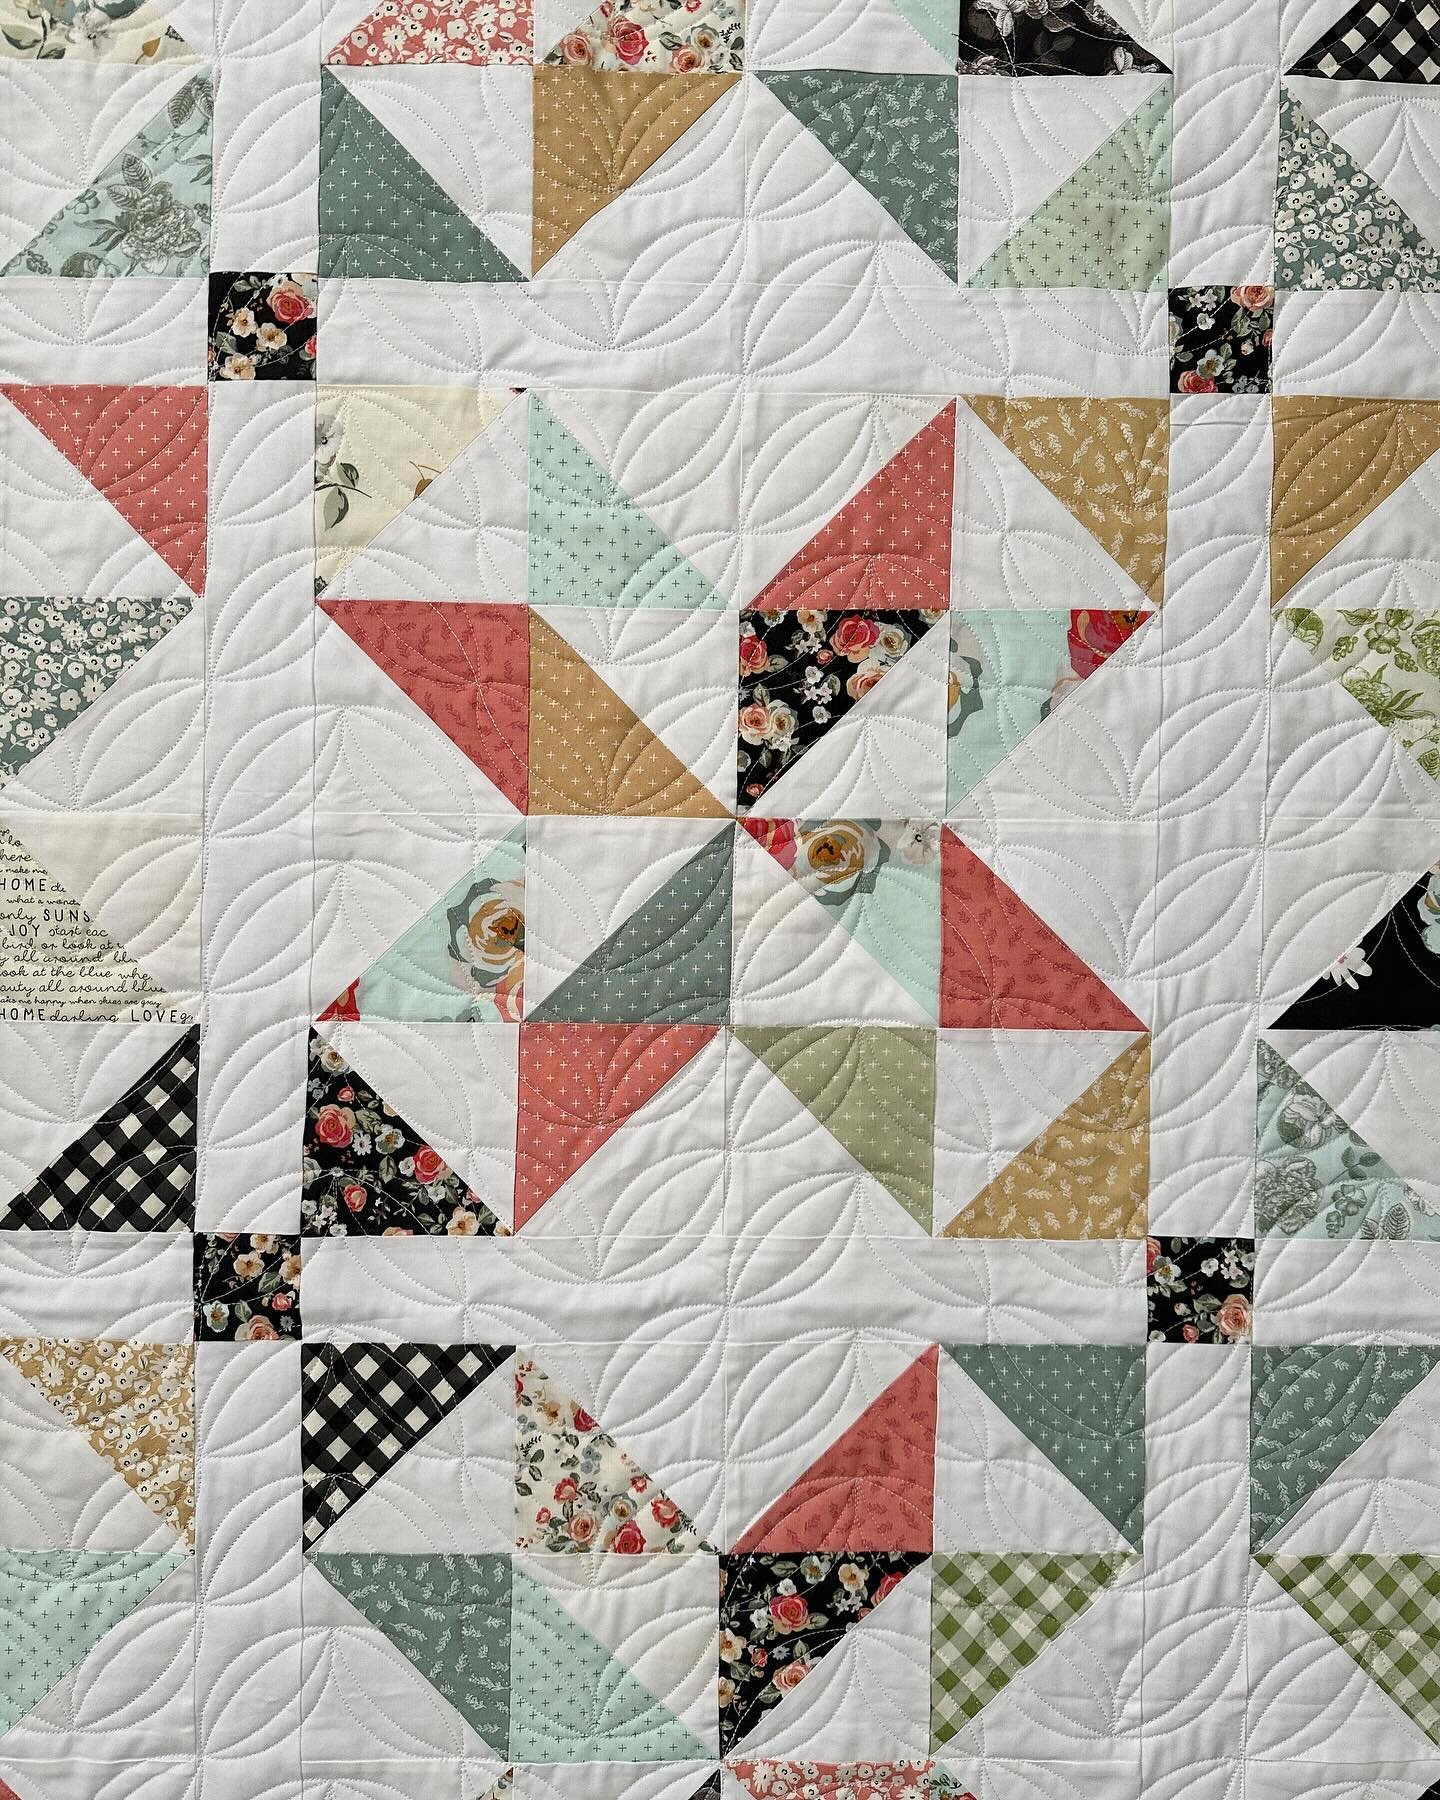 Ashley made this darling Starlight Gardens quilt by @maplecottagedesigns &bull; for links to the pattern and panto, go to last week&rsquo;s blog post entitled &ldquo;Ashley&rsquo;s Quilts&rdquo; at www.quiltingit.com/blog

She chose my Woven Orange P